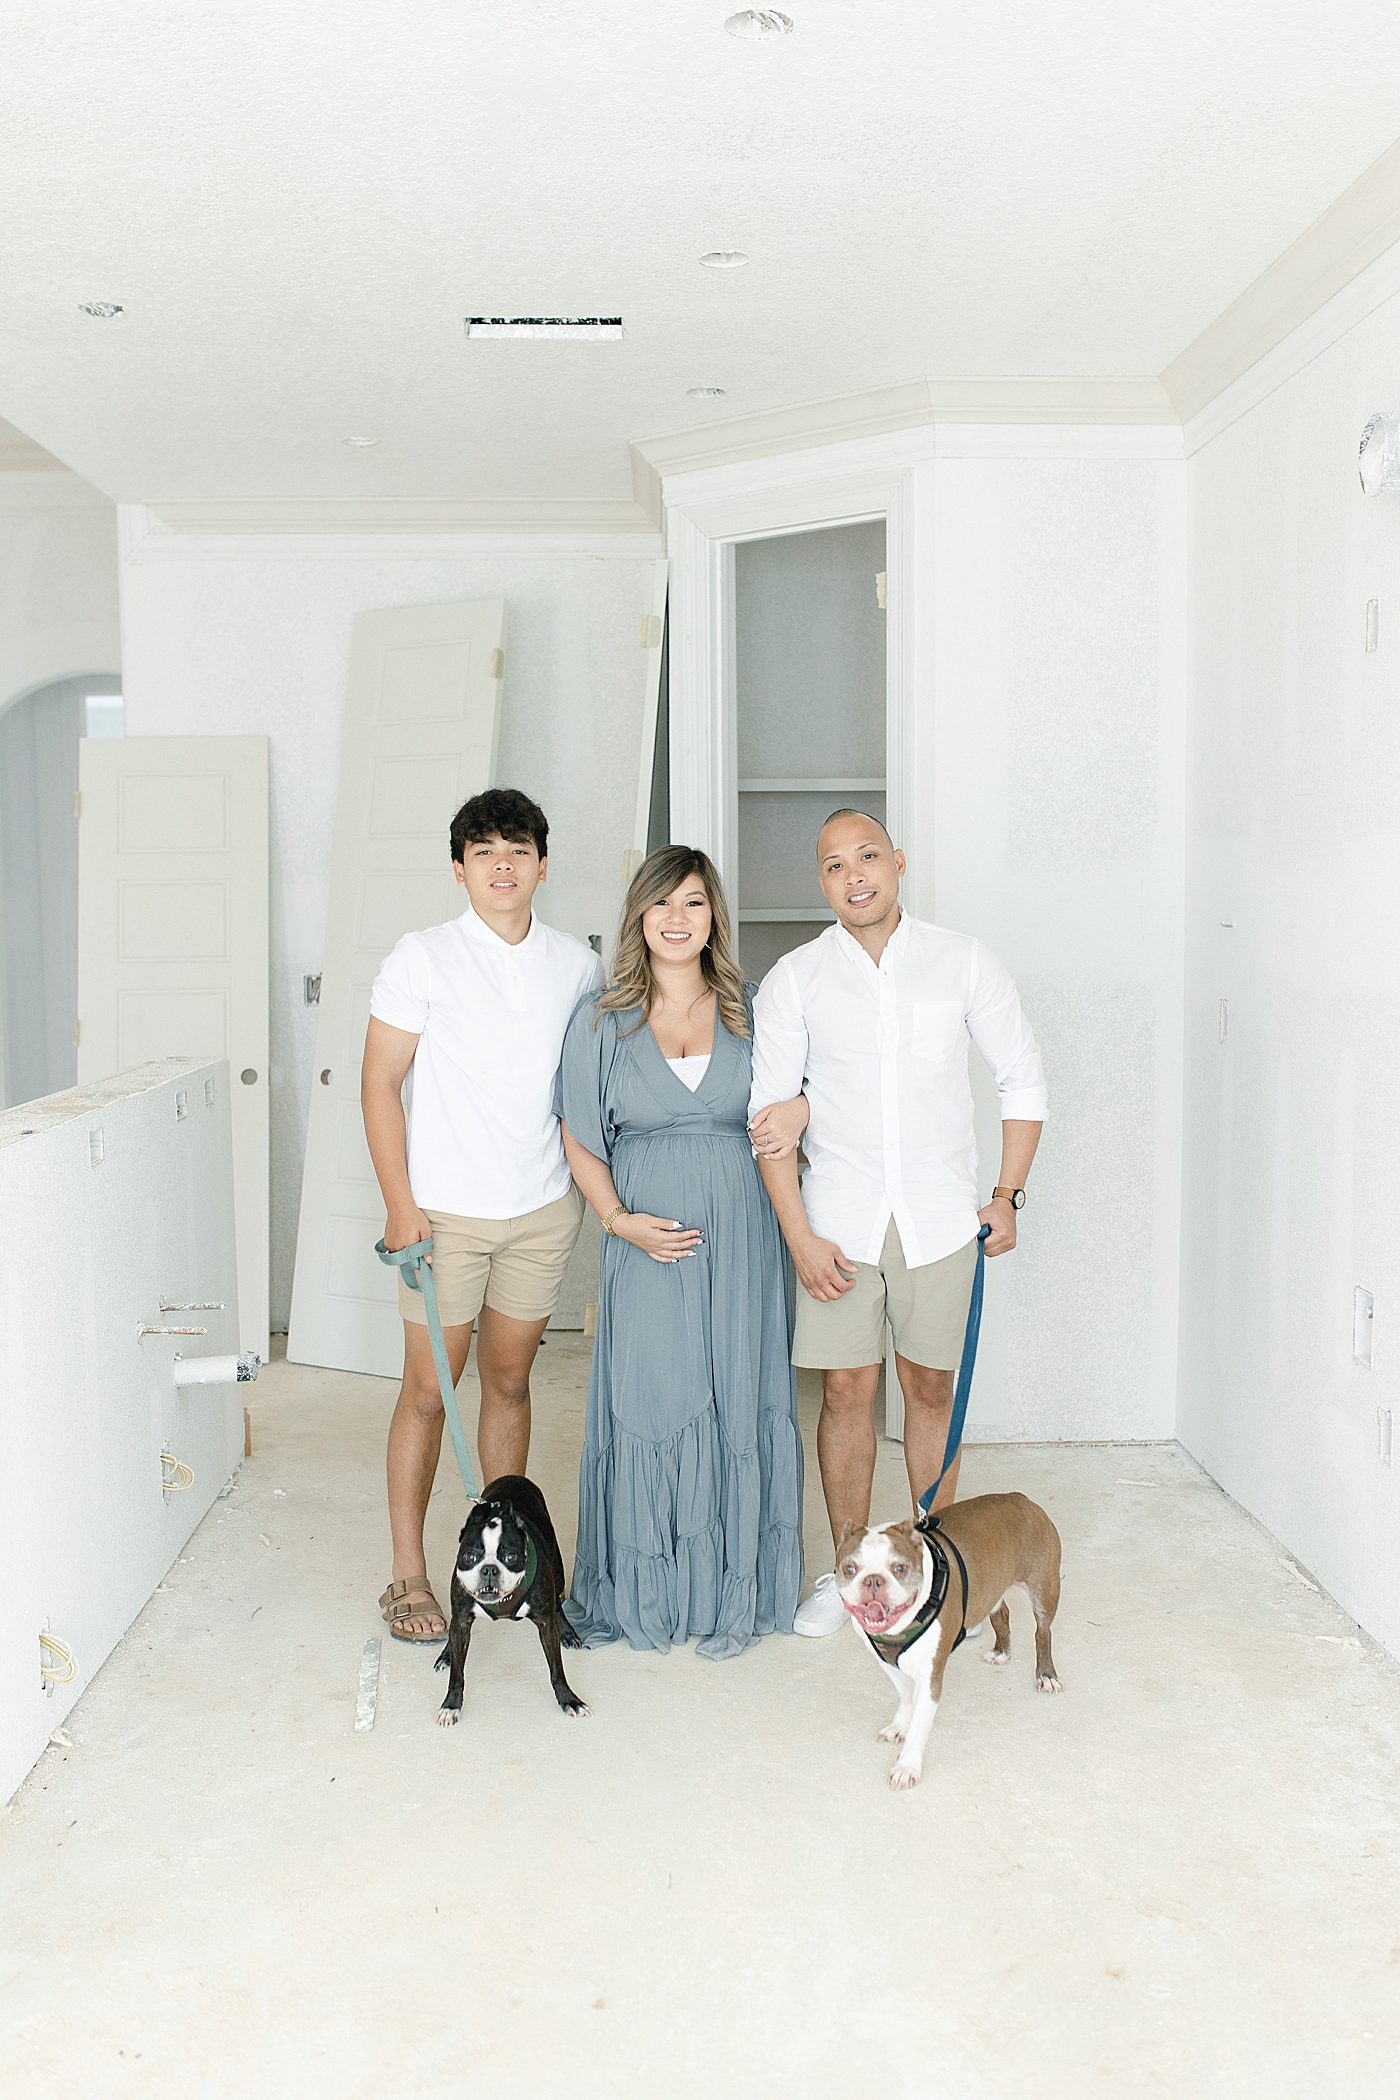 Family photos in new home before it's finished | Photo by Little Sunshine Photography 